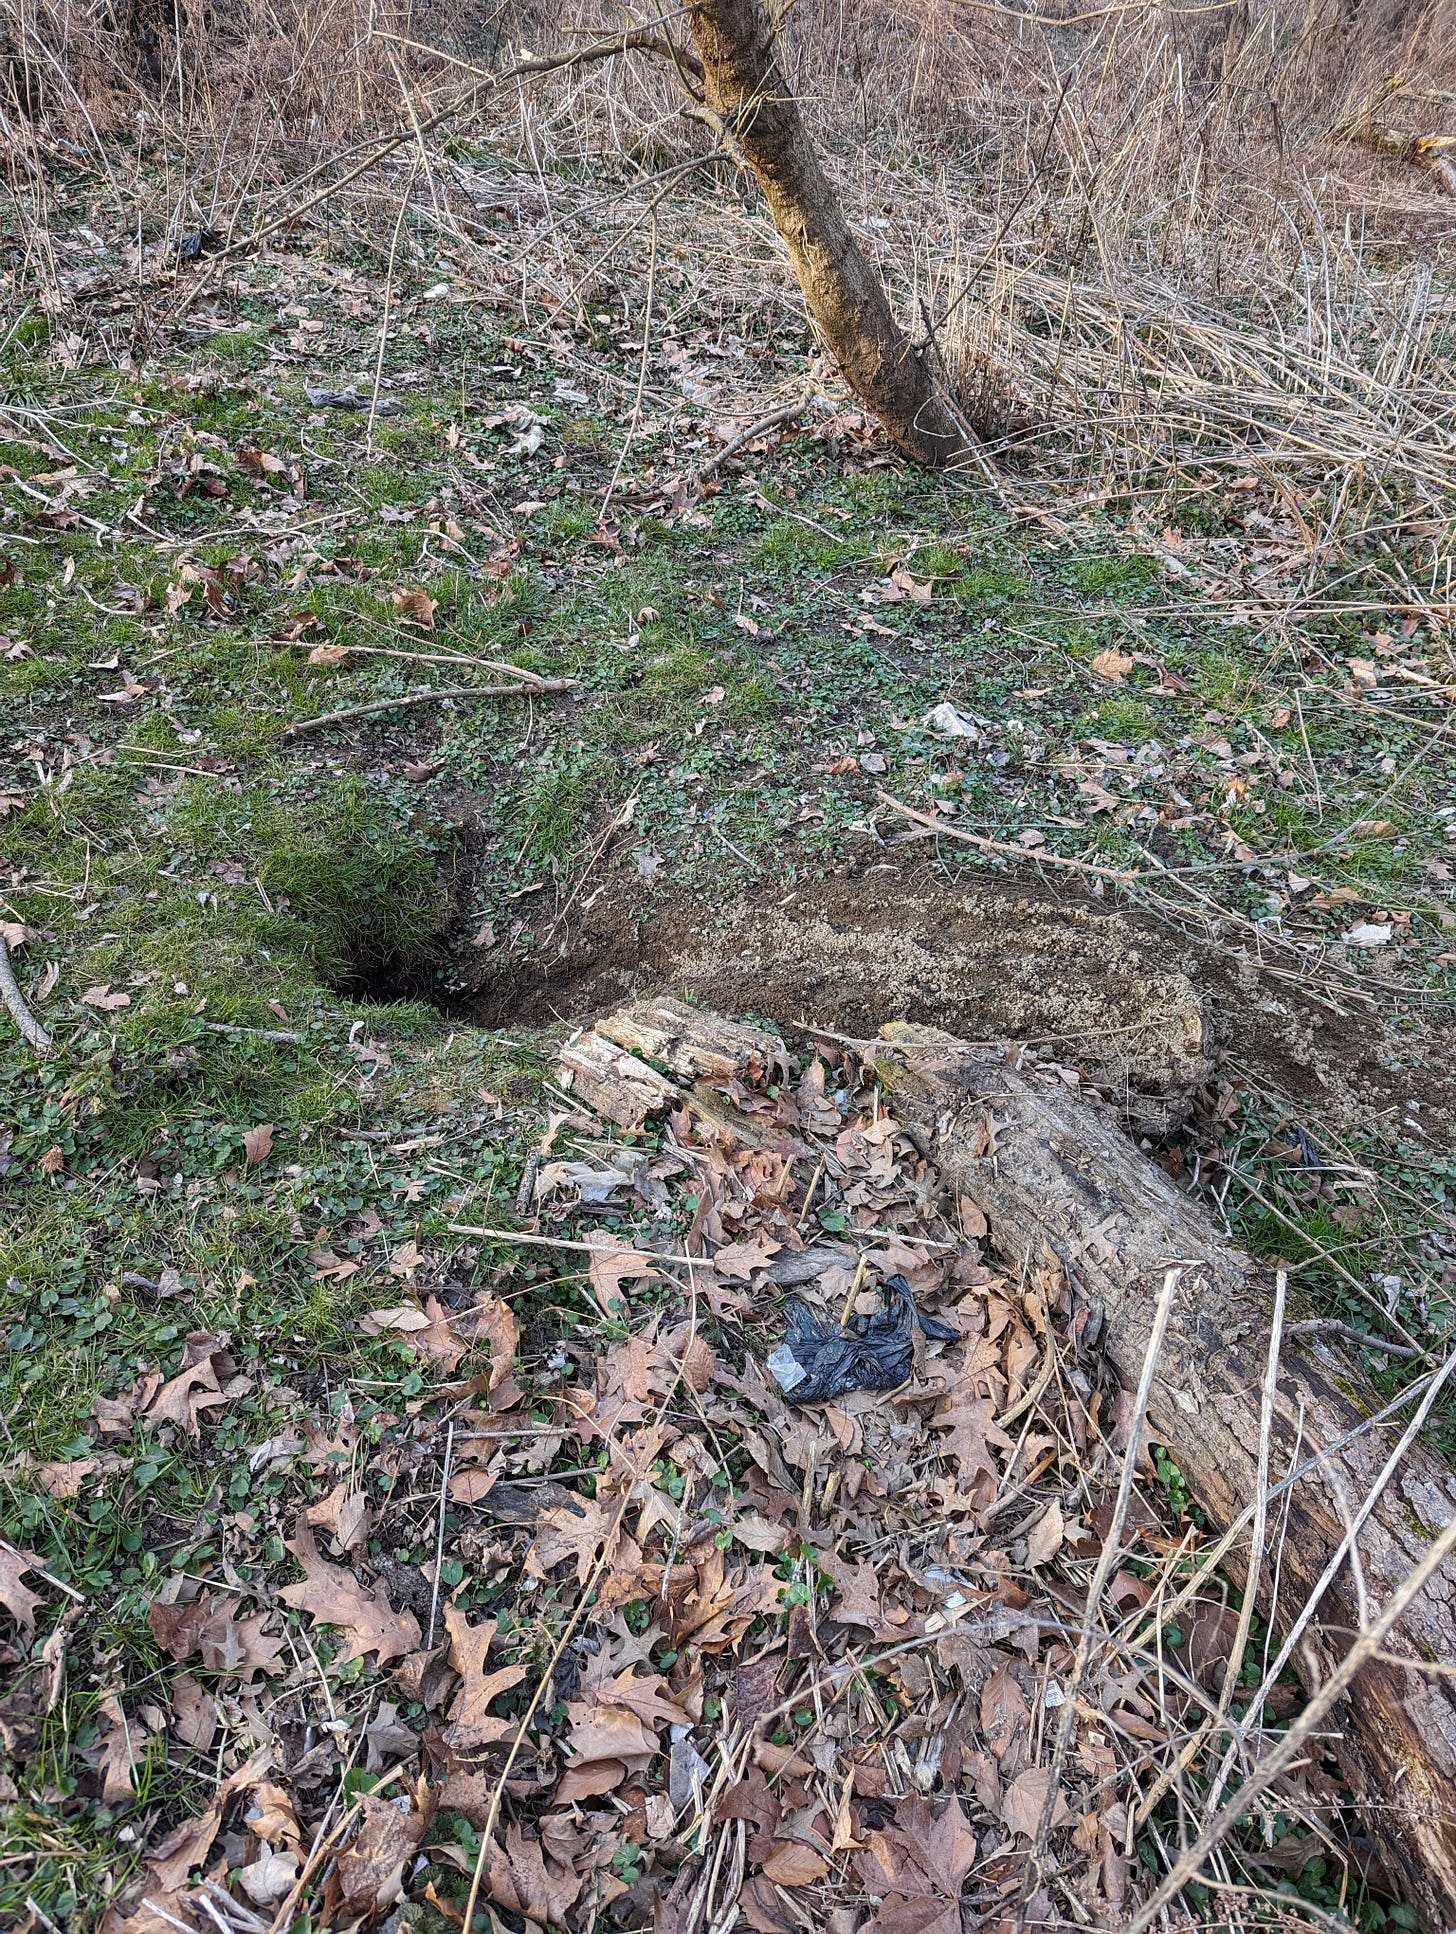 a burrow with fresh soil kicked out, amid young vegetation